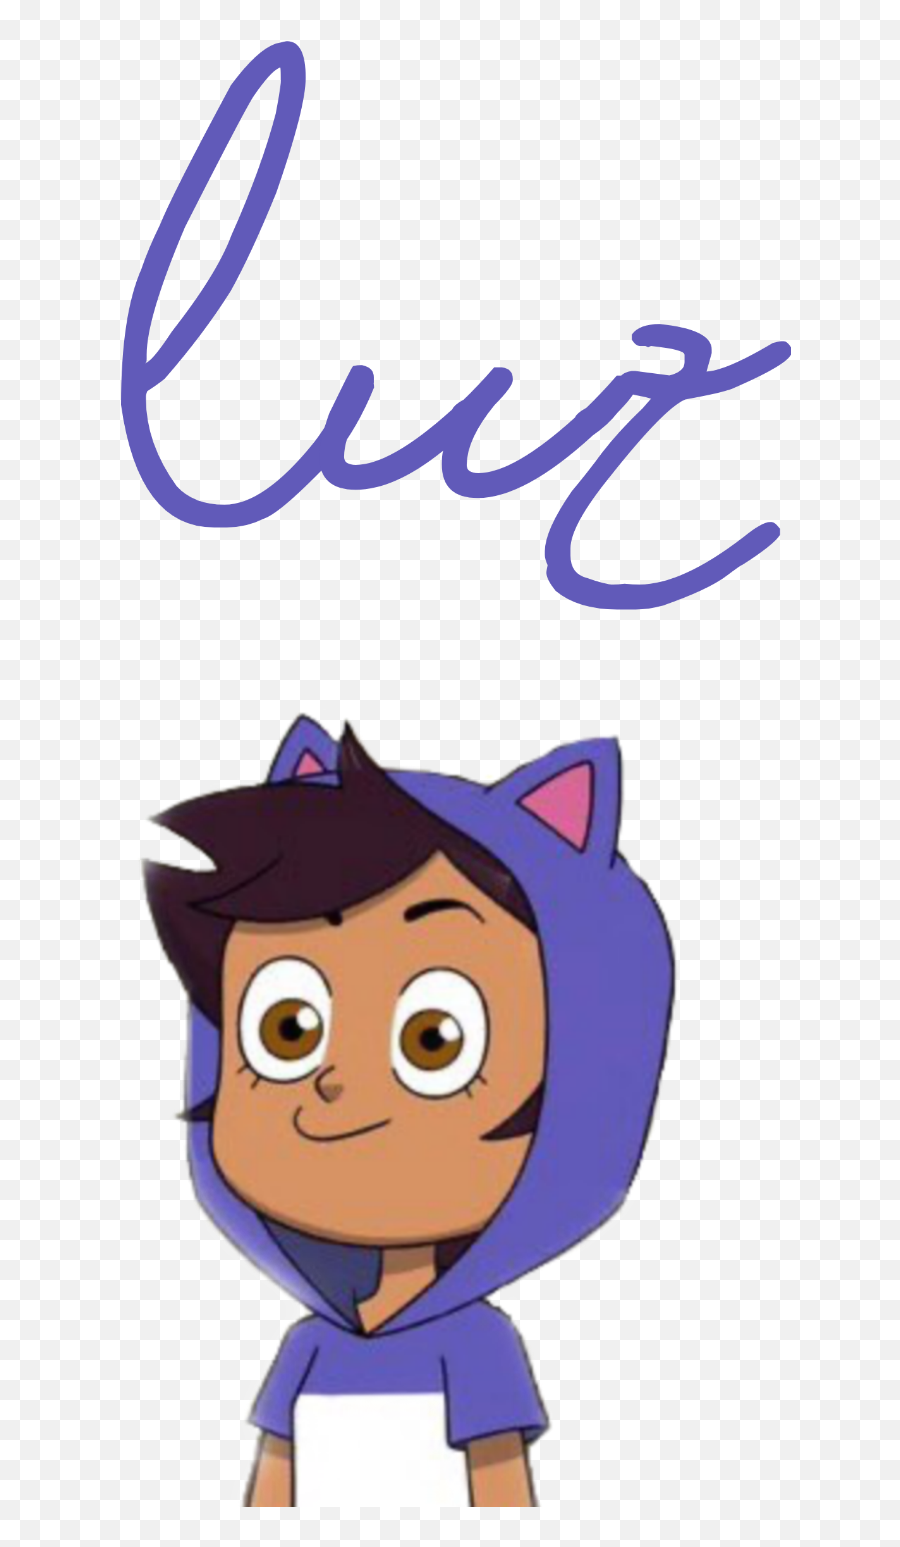 Vernorexia - Use My Items Plz Cis Sheher Asexual Les Owl House Luz Edit Png,Louise Belcher Icon